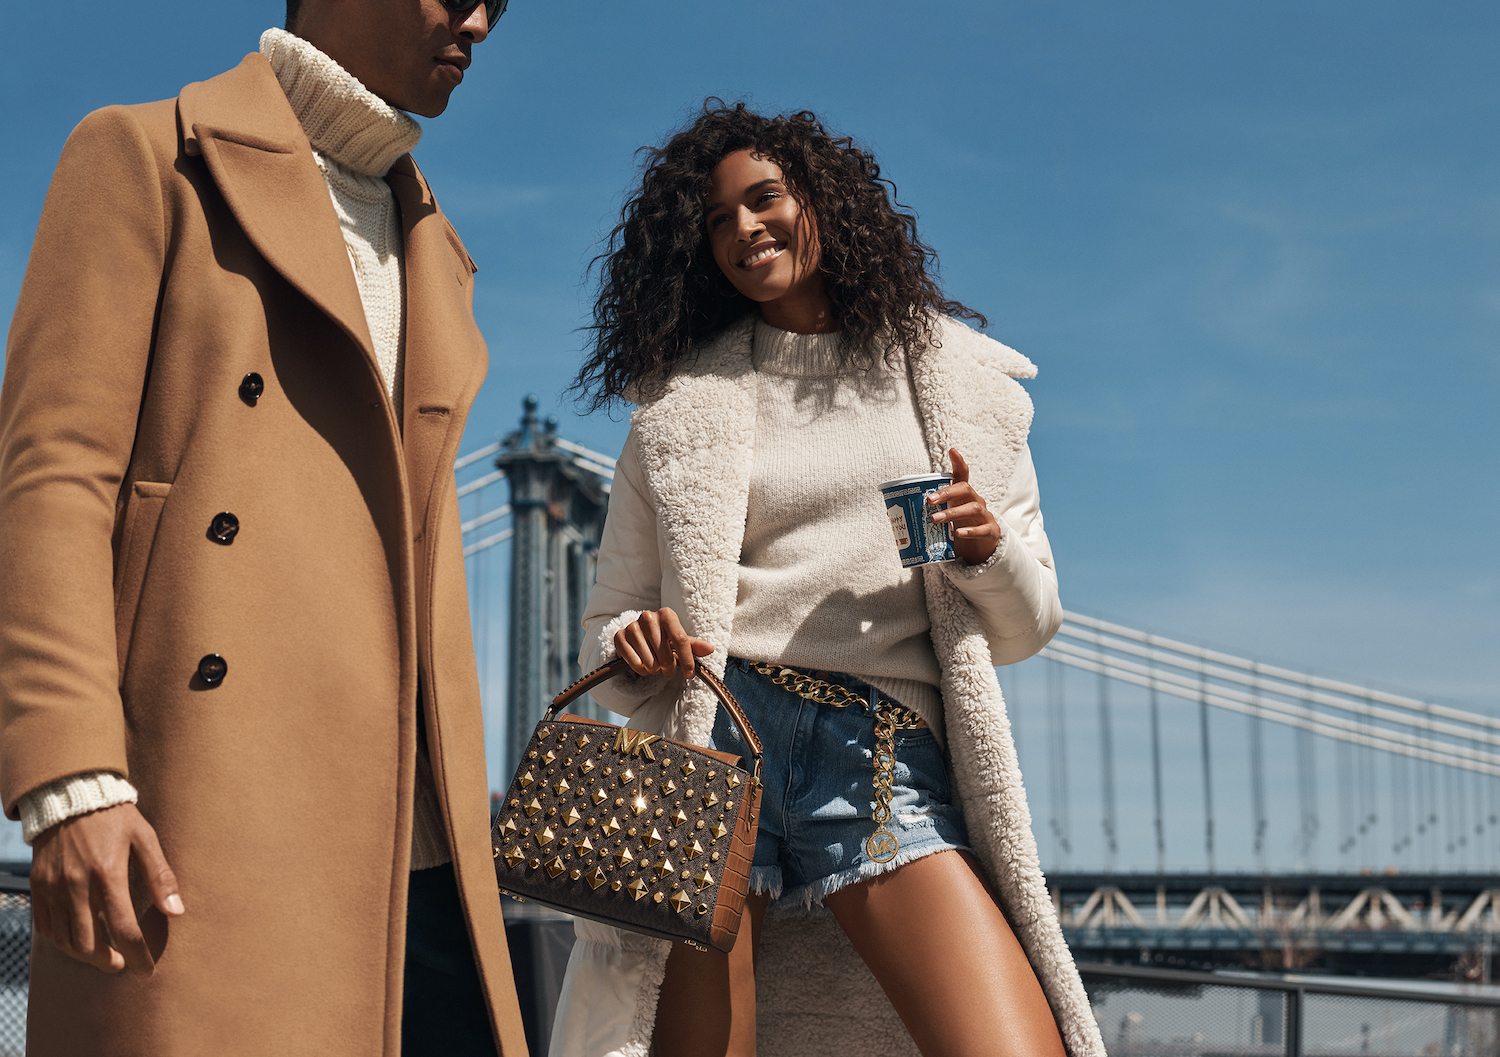 Bella Hadid & Models In Michael Kors Campaign In NYC – Photos